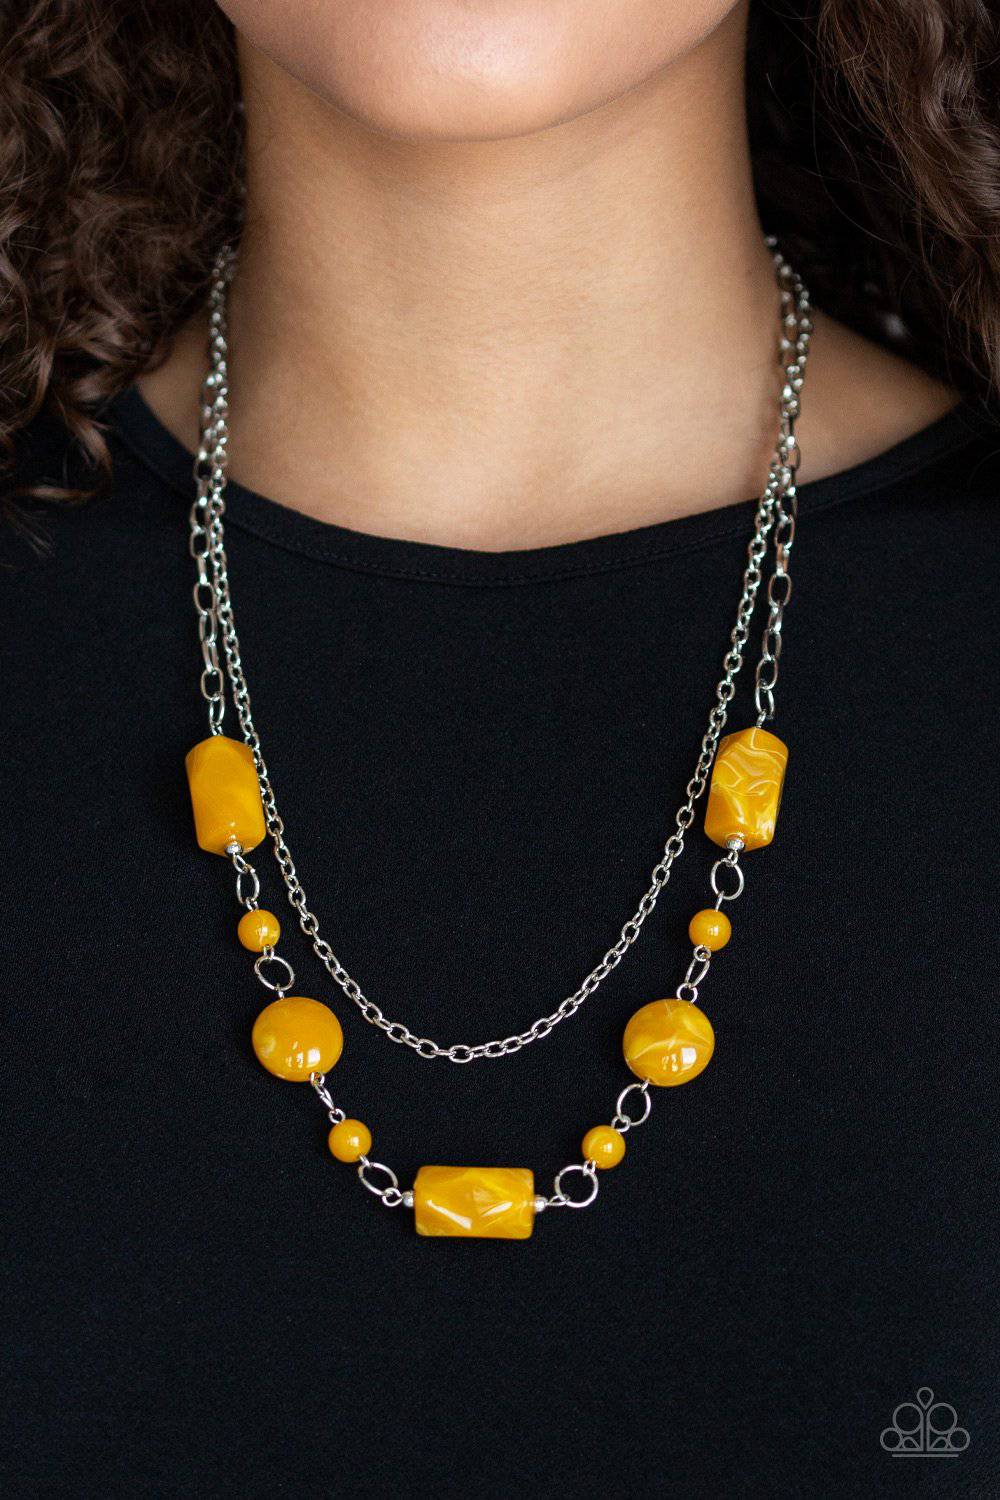 Colorfully Cosmopolitan - Yellow Acrylic Bead Necklace - Paparazzi Accessories - GlaMarous Titi Jewels